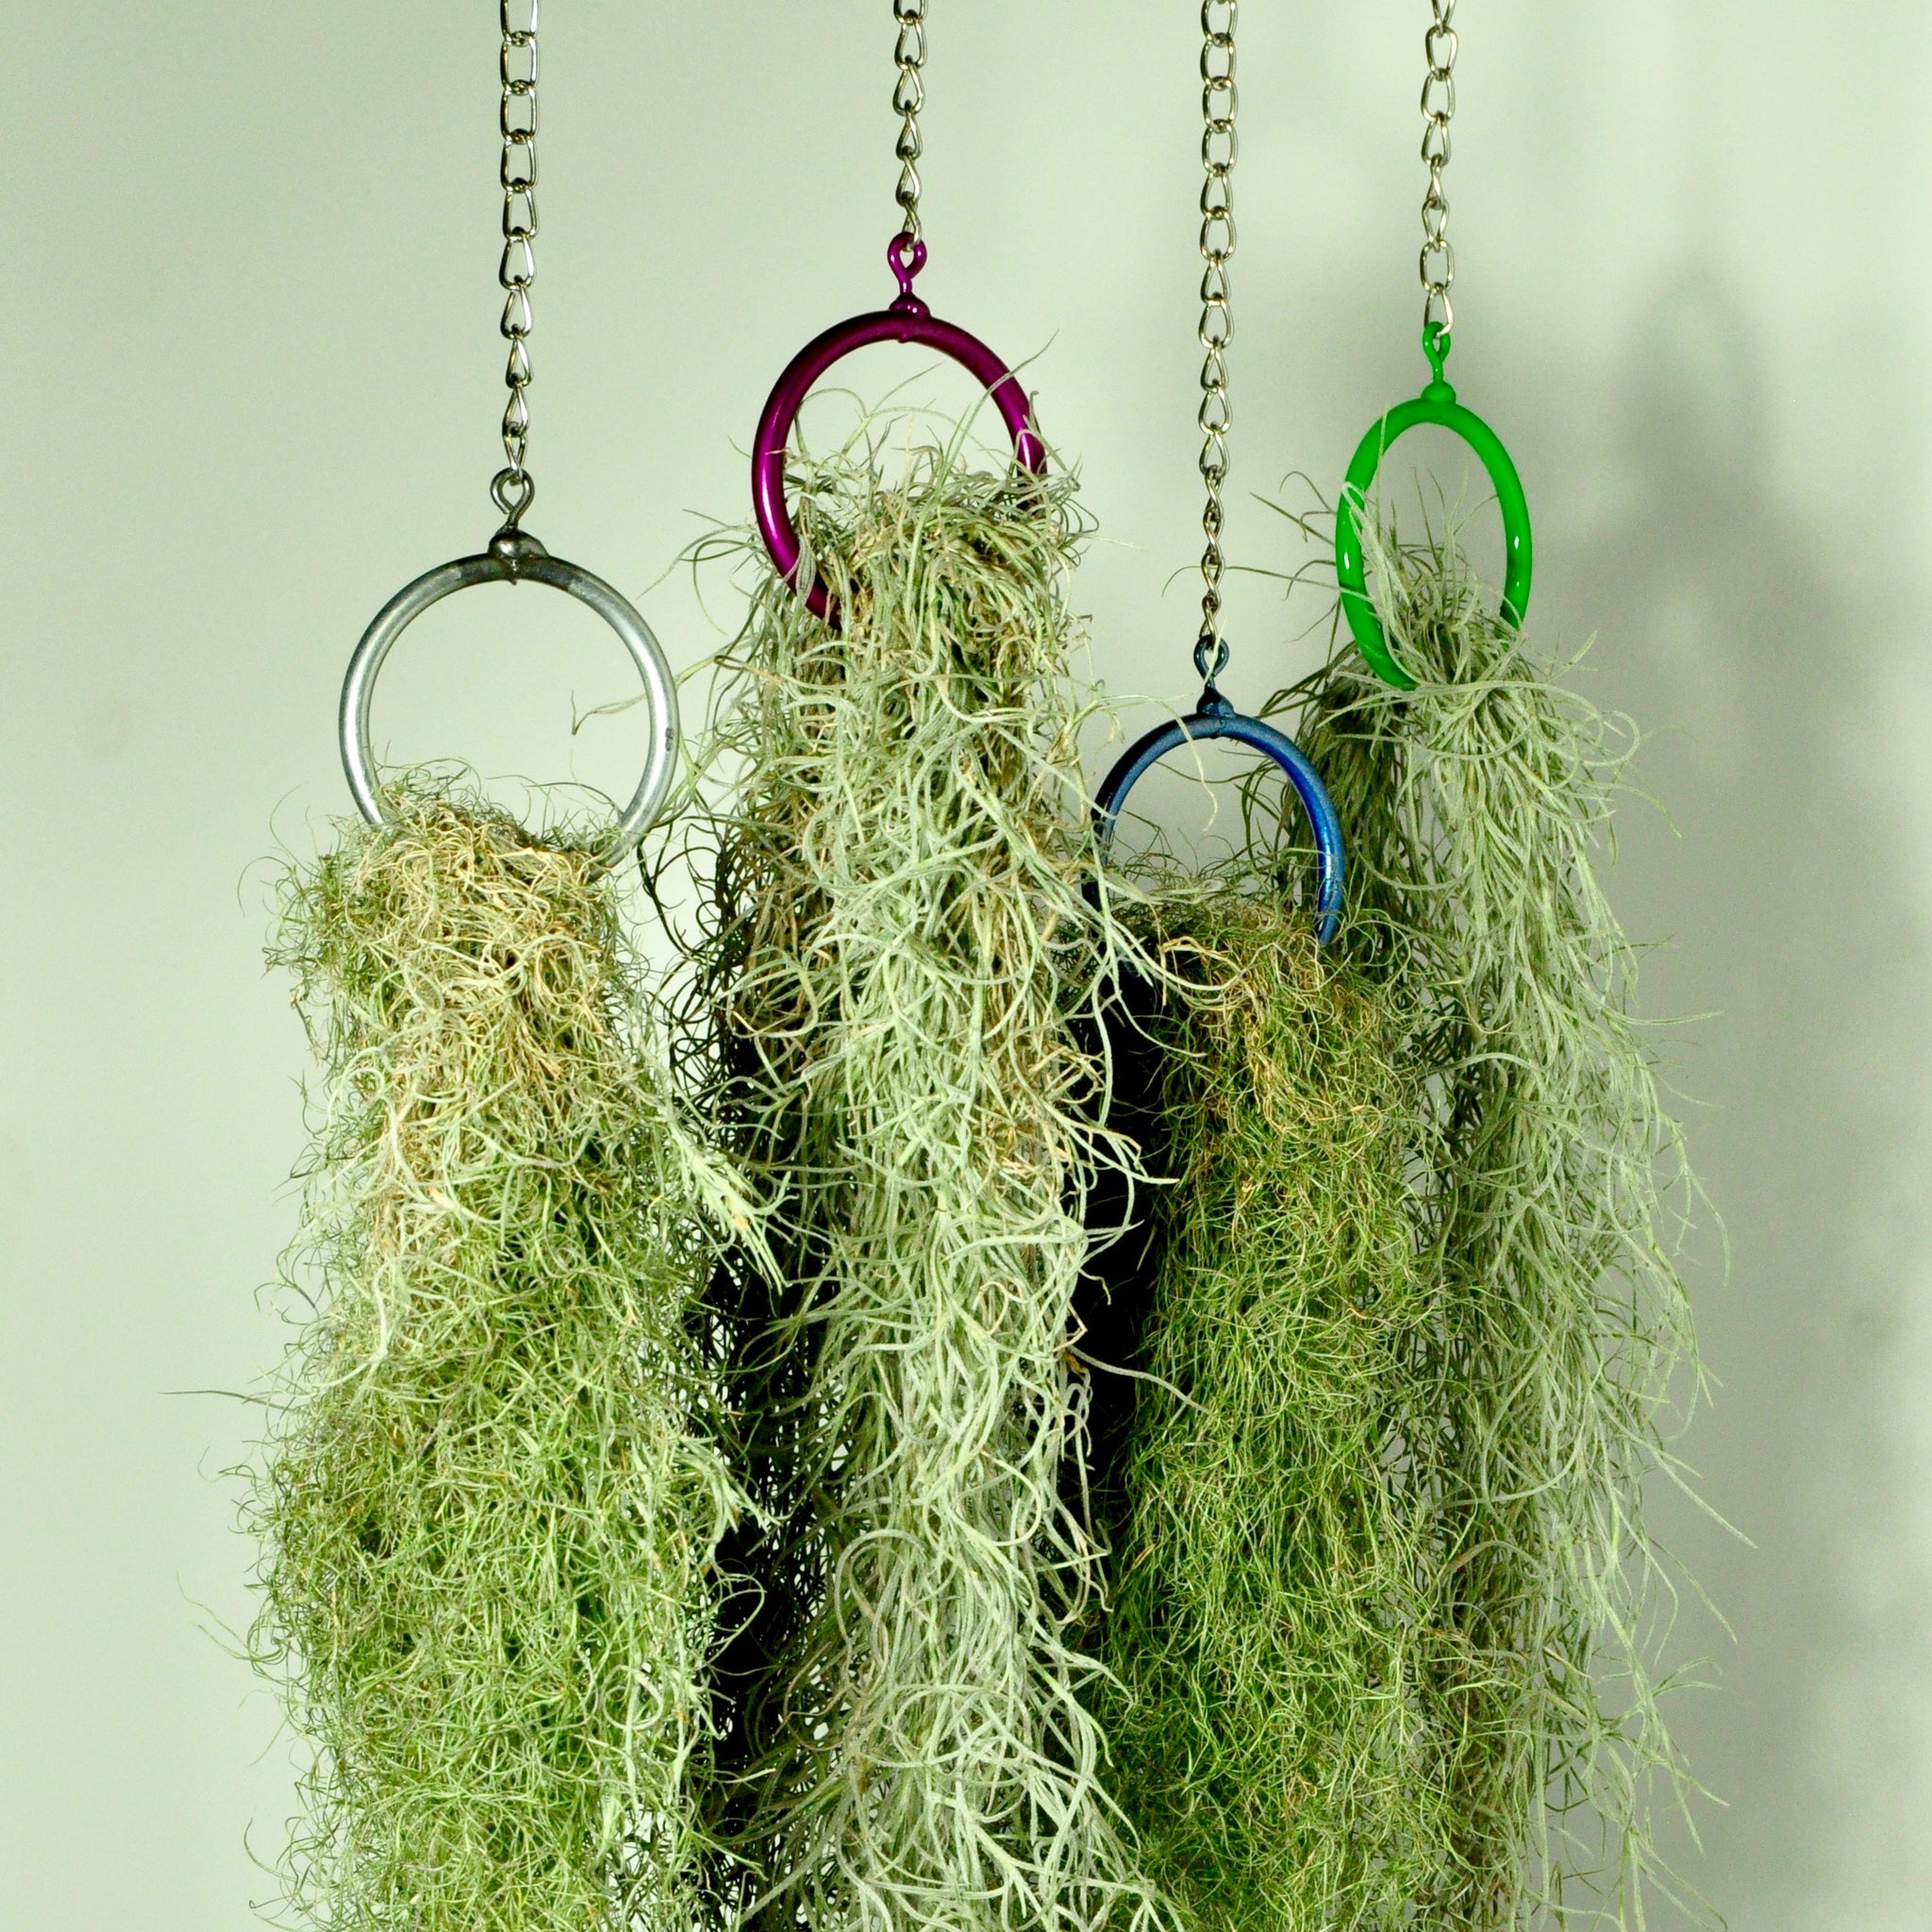 SALE - Tillandsia Guatemala Gray Spanish Moss - 1 Foot Clumps - Set of –  Air Plant Supply Co.